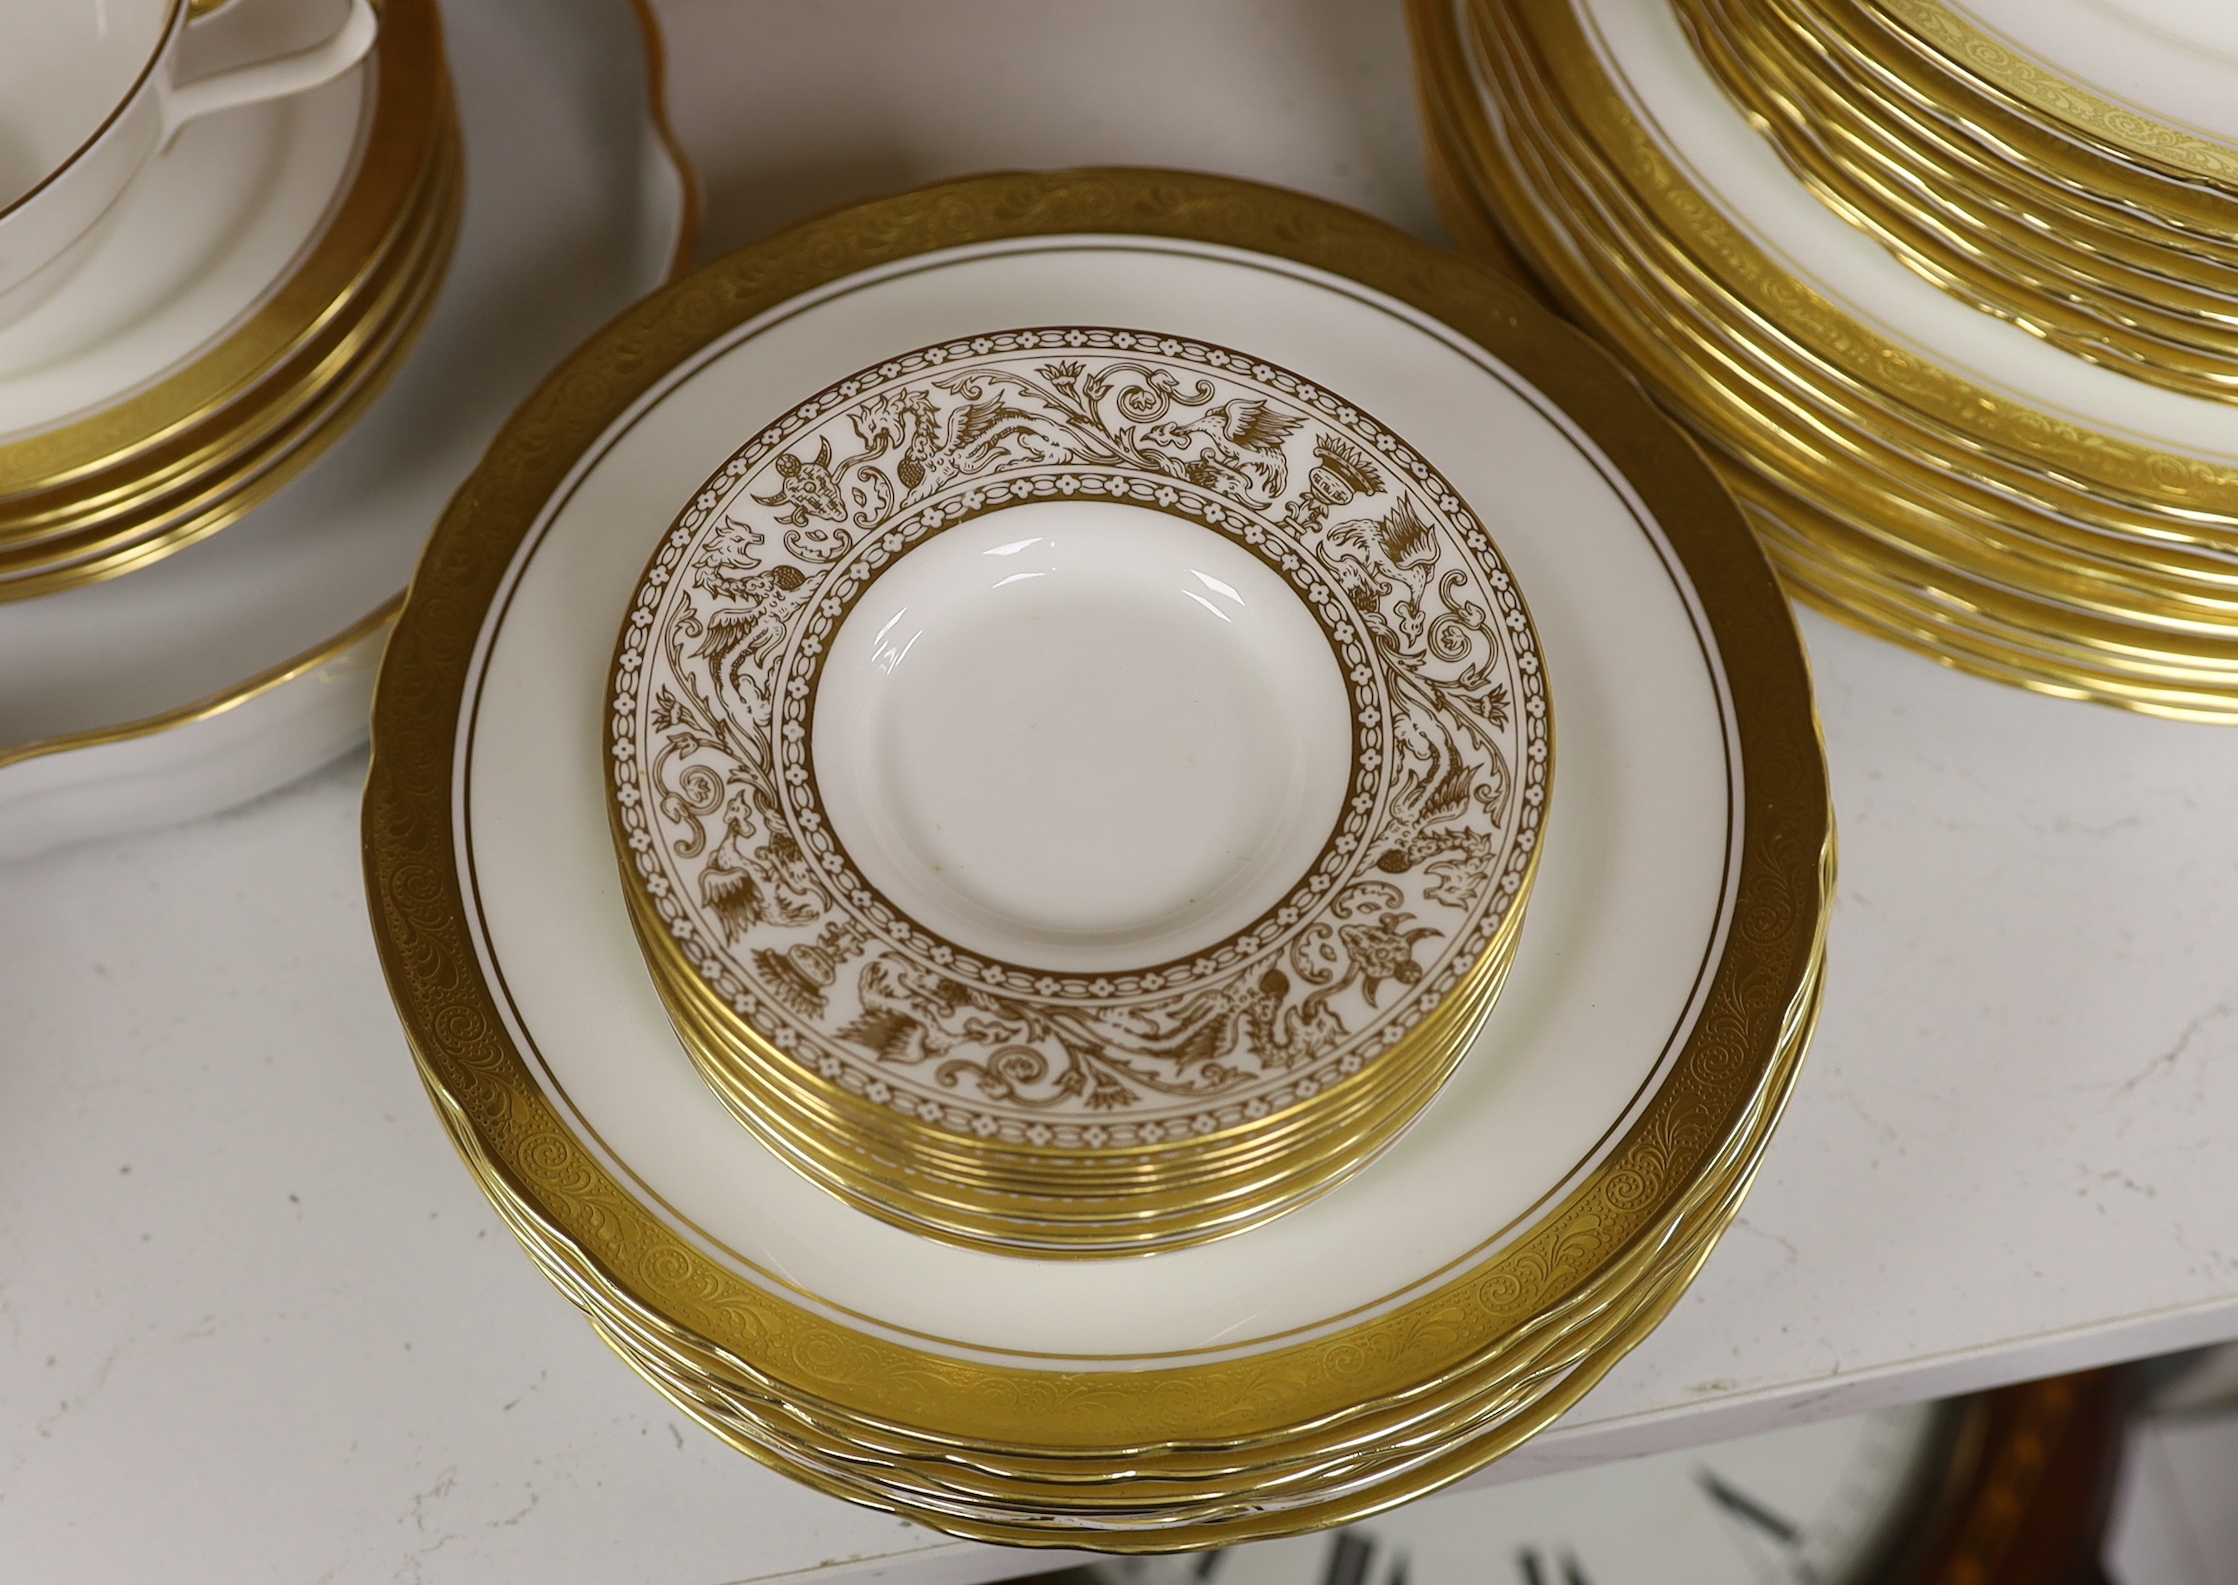 Anysley Argosy, Wedgwood Gold Florentine, Worcester gold decorated dinner wares including coffee pot, soup bowls, twin handled bowls and plates